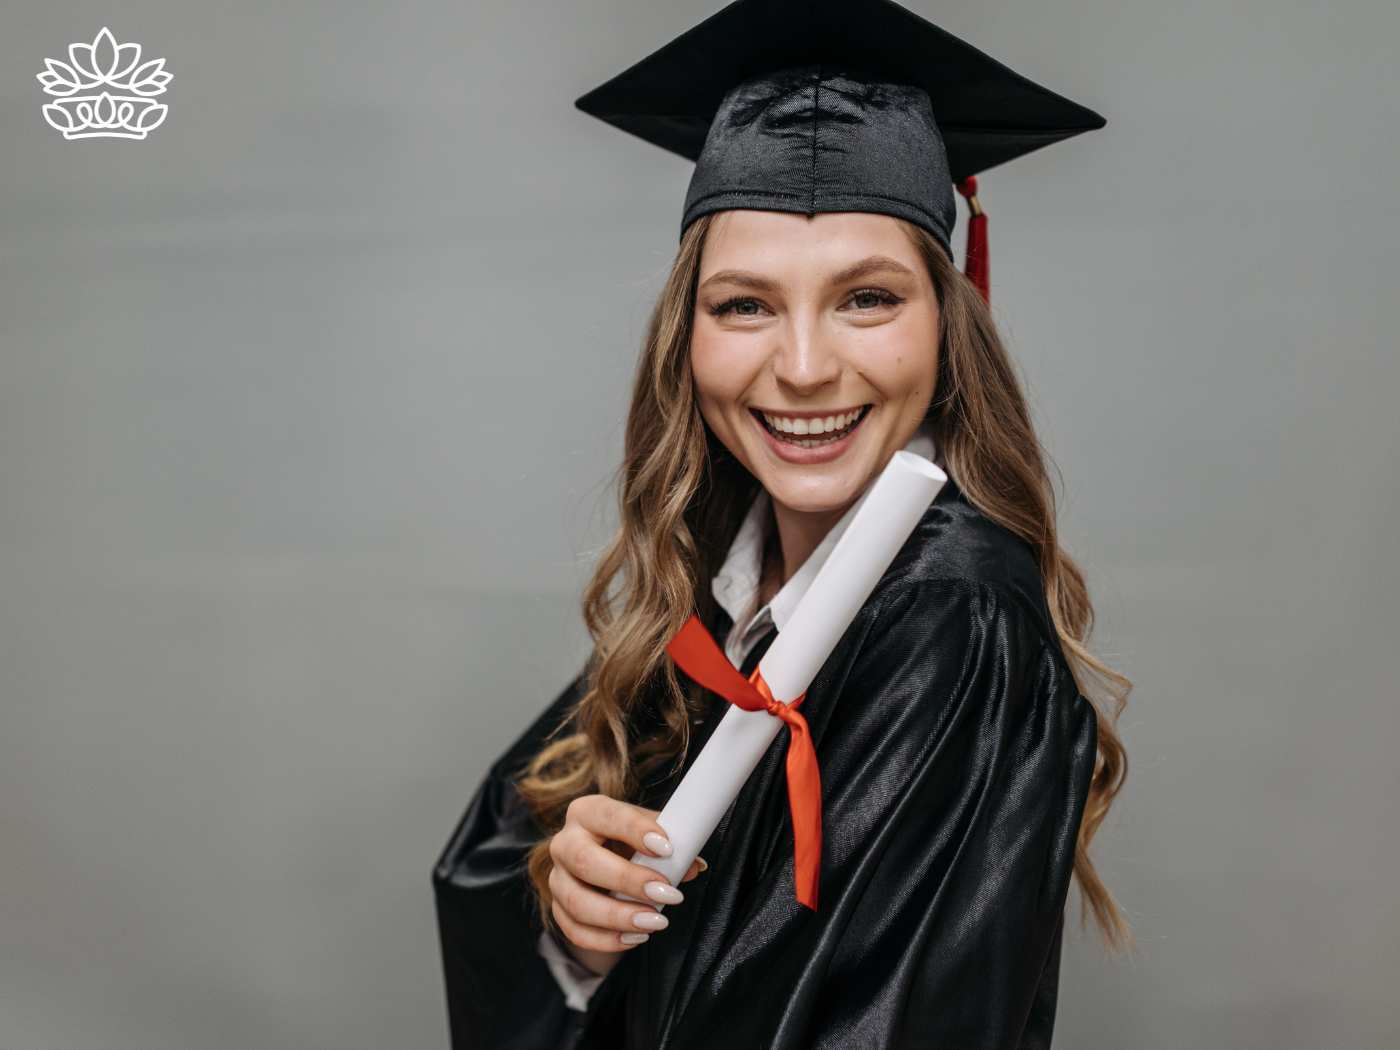 A radiant female graduate in academic regalia, holding her diploma with a red ribbon, smiling broadly, captured by Fabulous Flowers and Gifts, celebrating her success and graduation delivered with heart